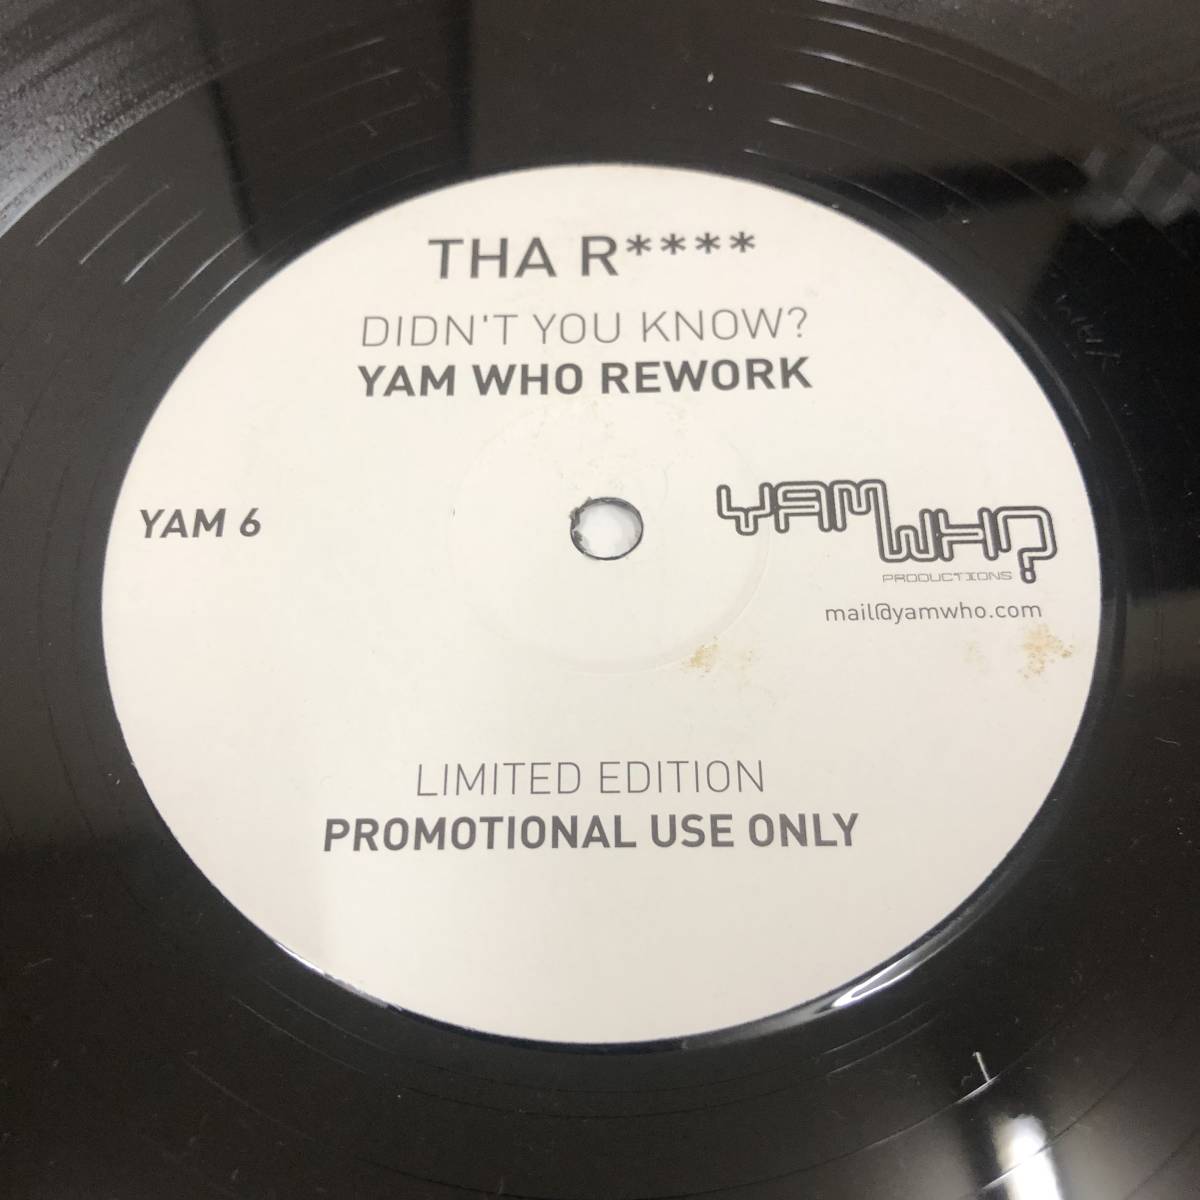 Tha R***** - Didn't You Know? (Yam Who Rework) (A13)の画像2